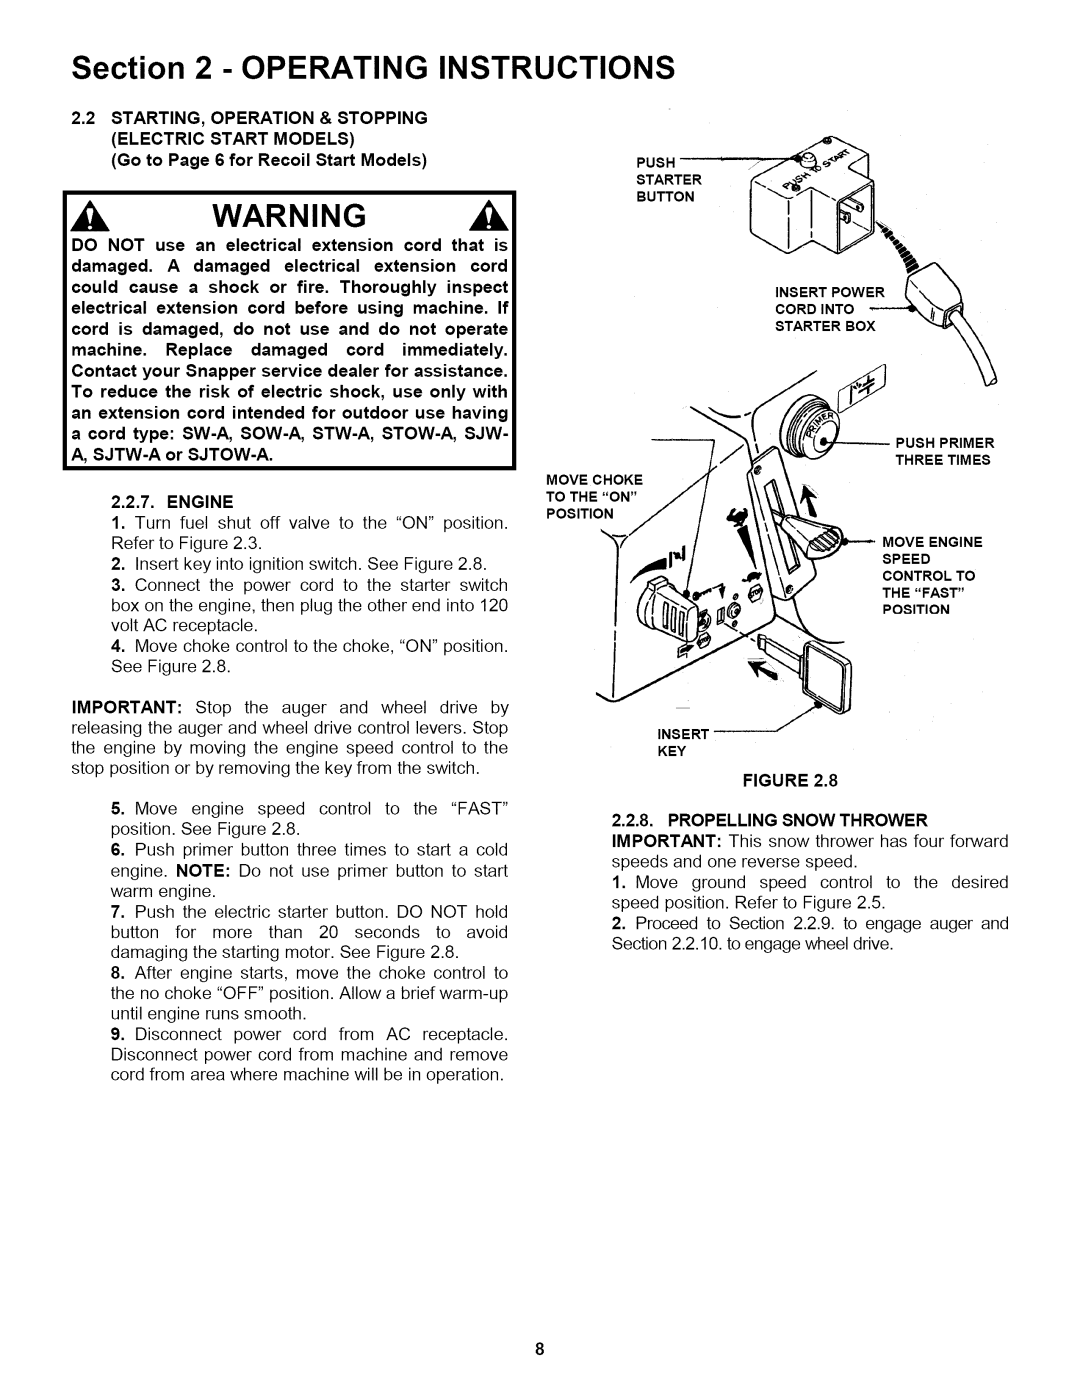 Snapper 155223 important safety instructions Operating Instructions, Go to Page 6 for Recoil Start Models 